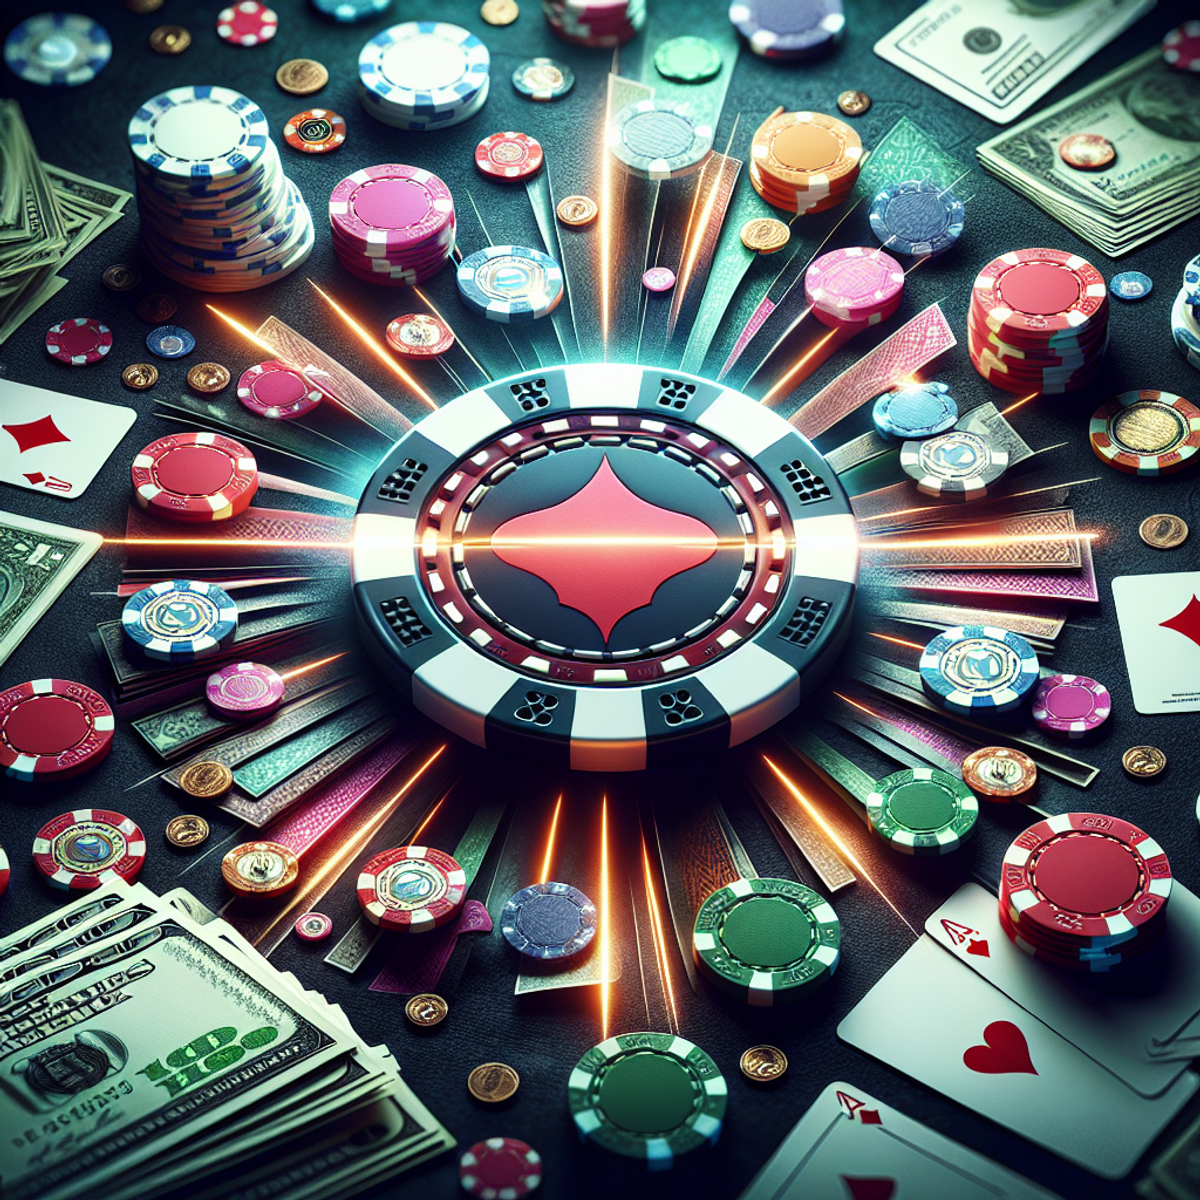 Casino chip surrounded by currency notes and playing cards, with a streak of light emphasizing the allure of high bonuses in online gambling.